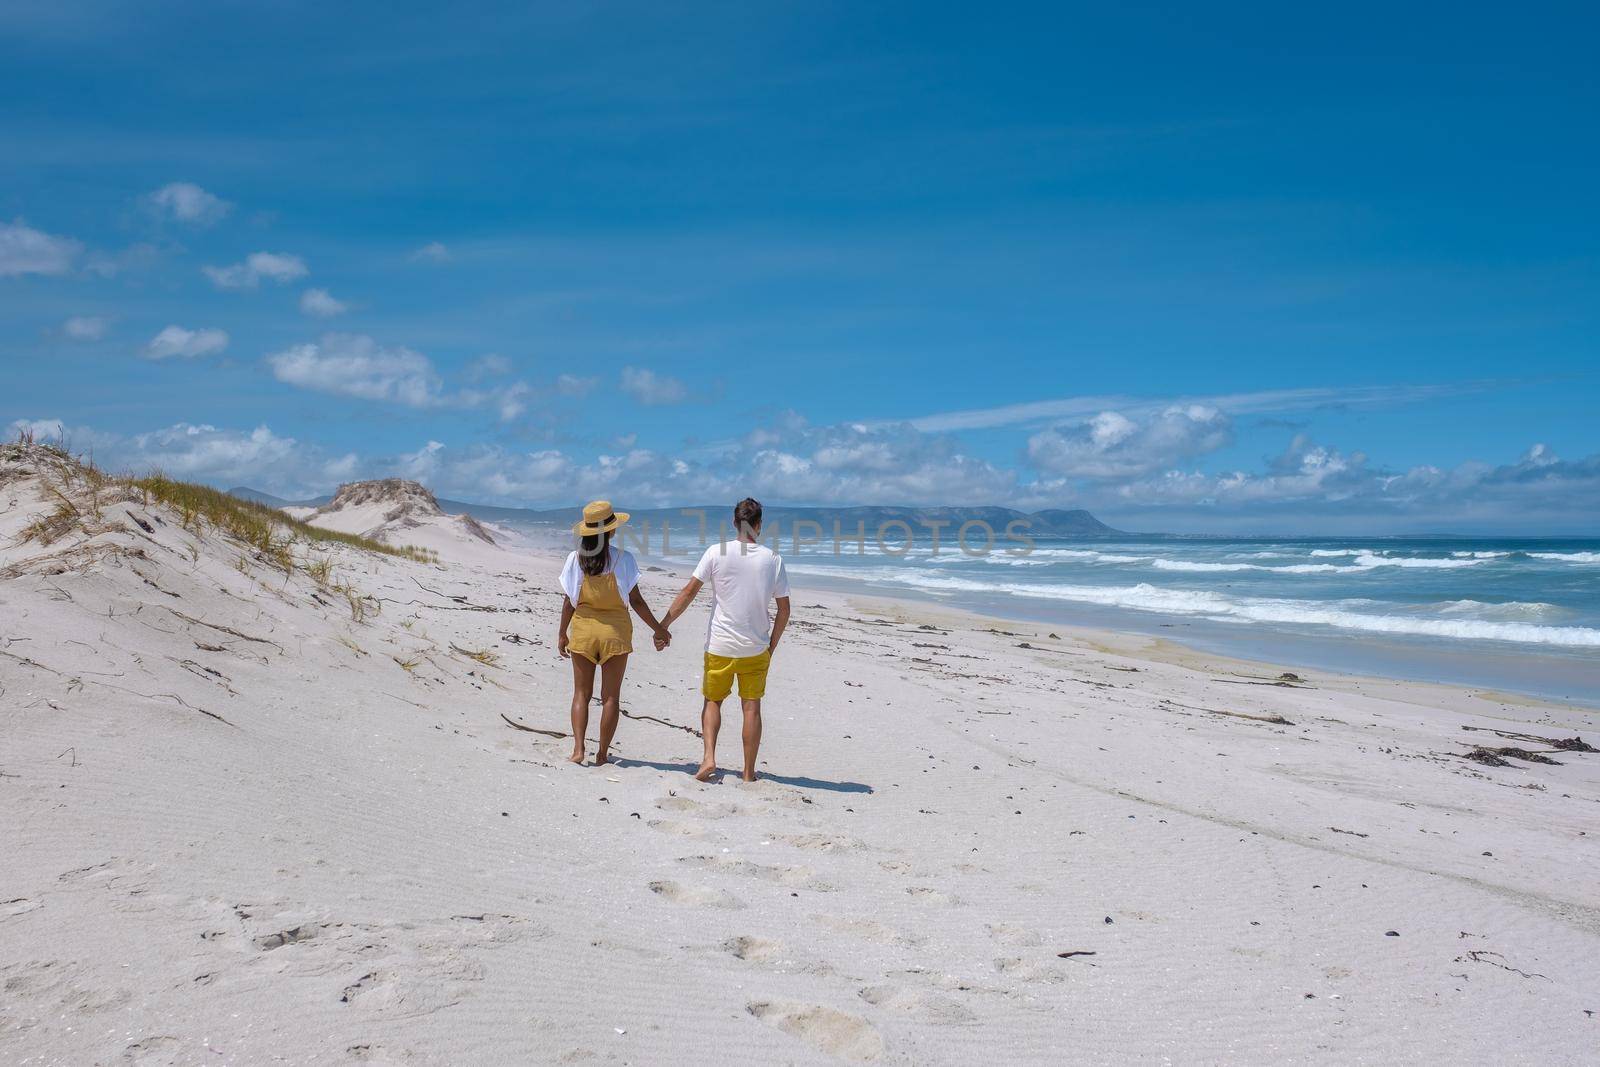 Cape Nature Walker Bay beach near Hermanus Western Cape South Africa. white beach and blue sky with clouds, sand dunes at the beach in South Africa, couple man and woman at the beach